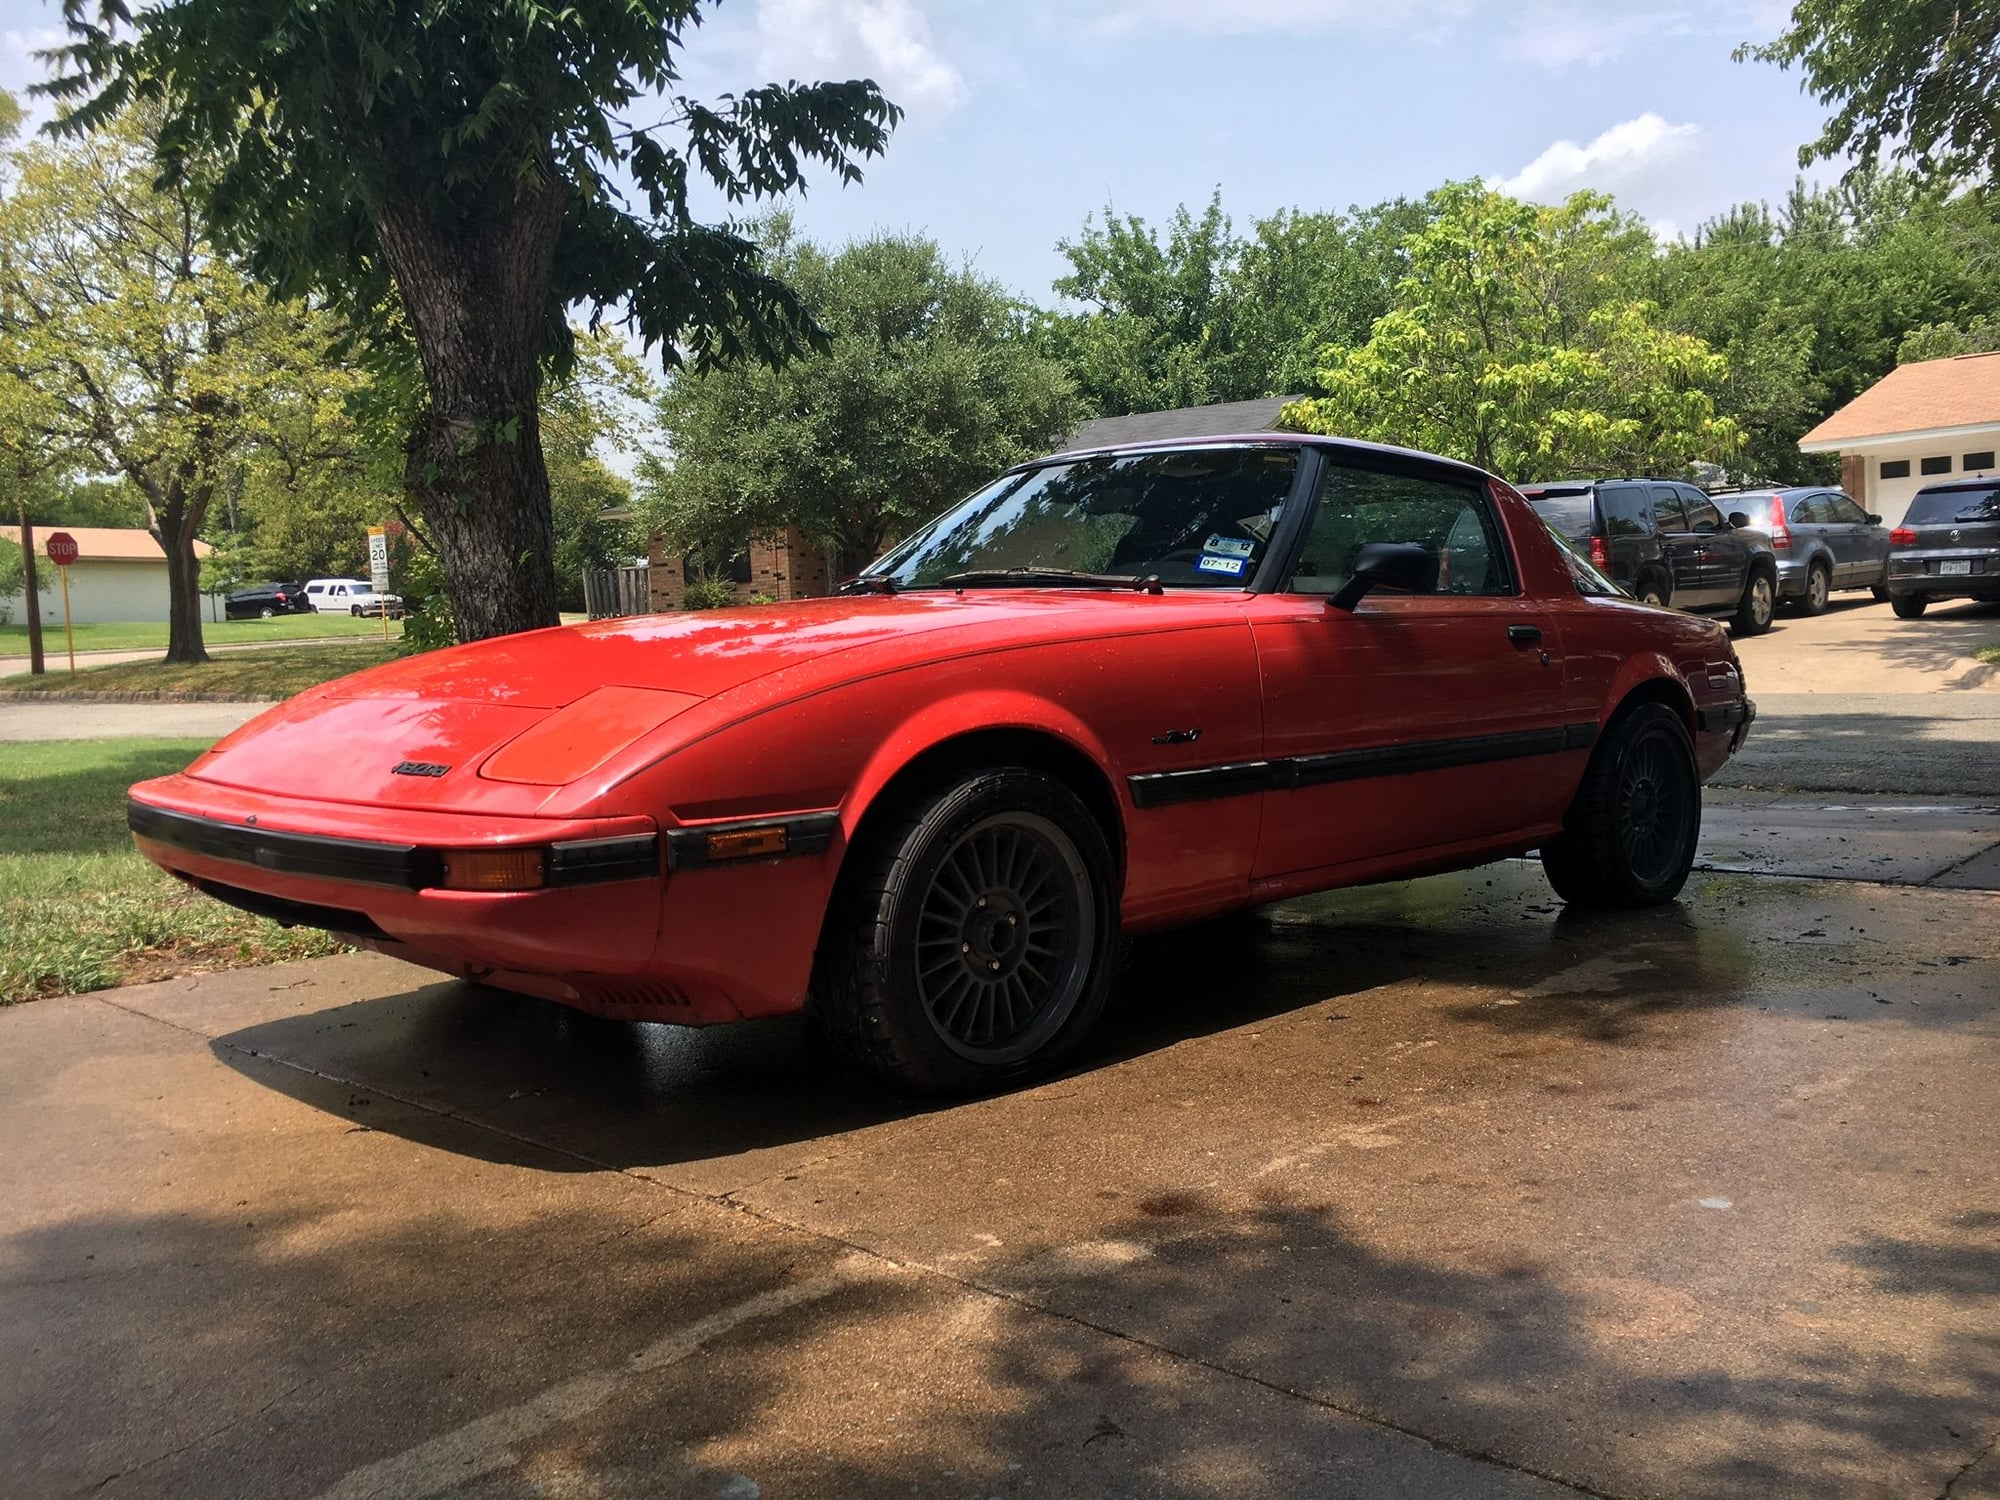 1984 Mazda RX-7 - 1984 RX-7 GSL-SE - Clean Rolling Chassis - Used - VIN JM1FB332XE0835890 - 128,000 Miles - Other - 2WD - Manual - Red - Ennis, TX 75119, United States